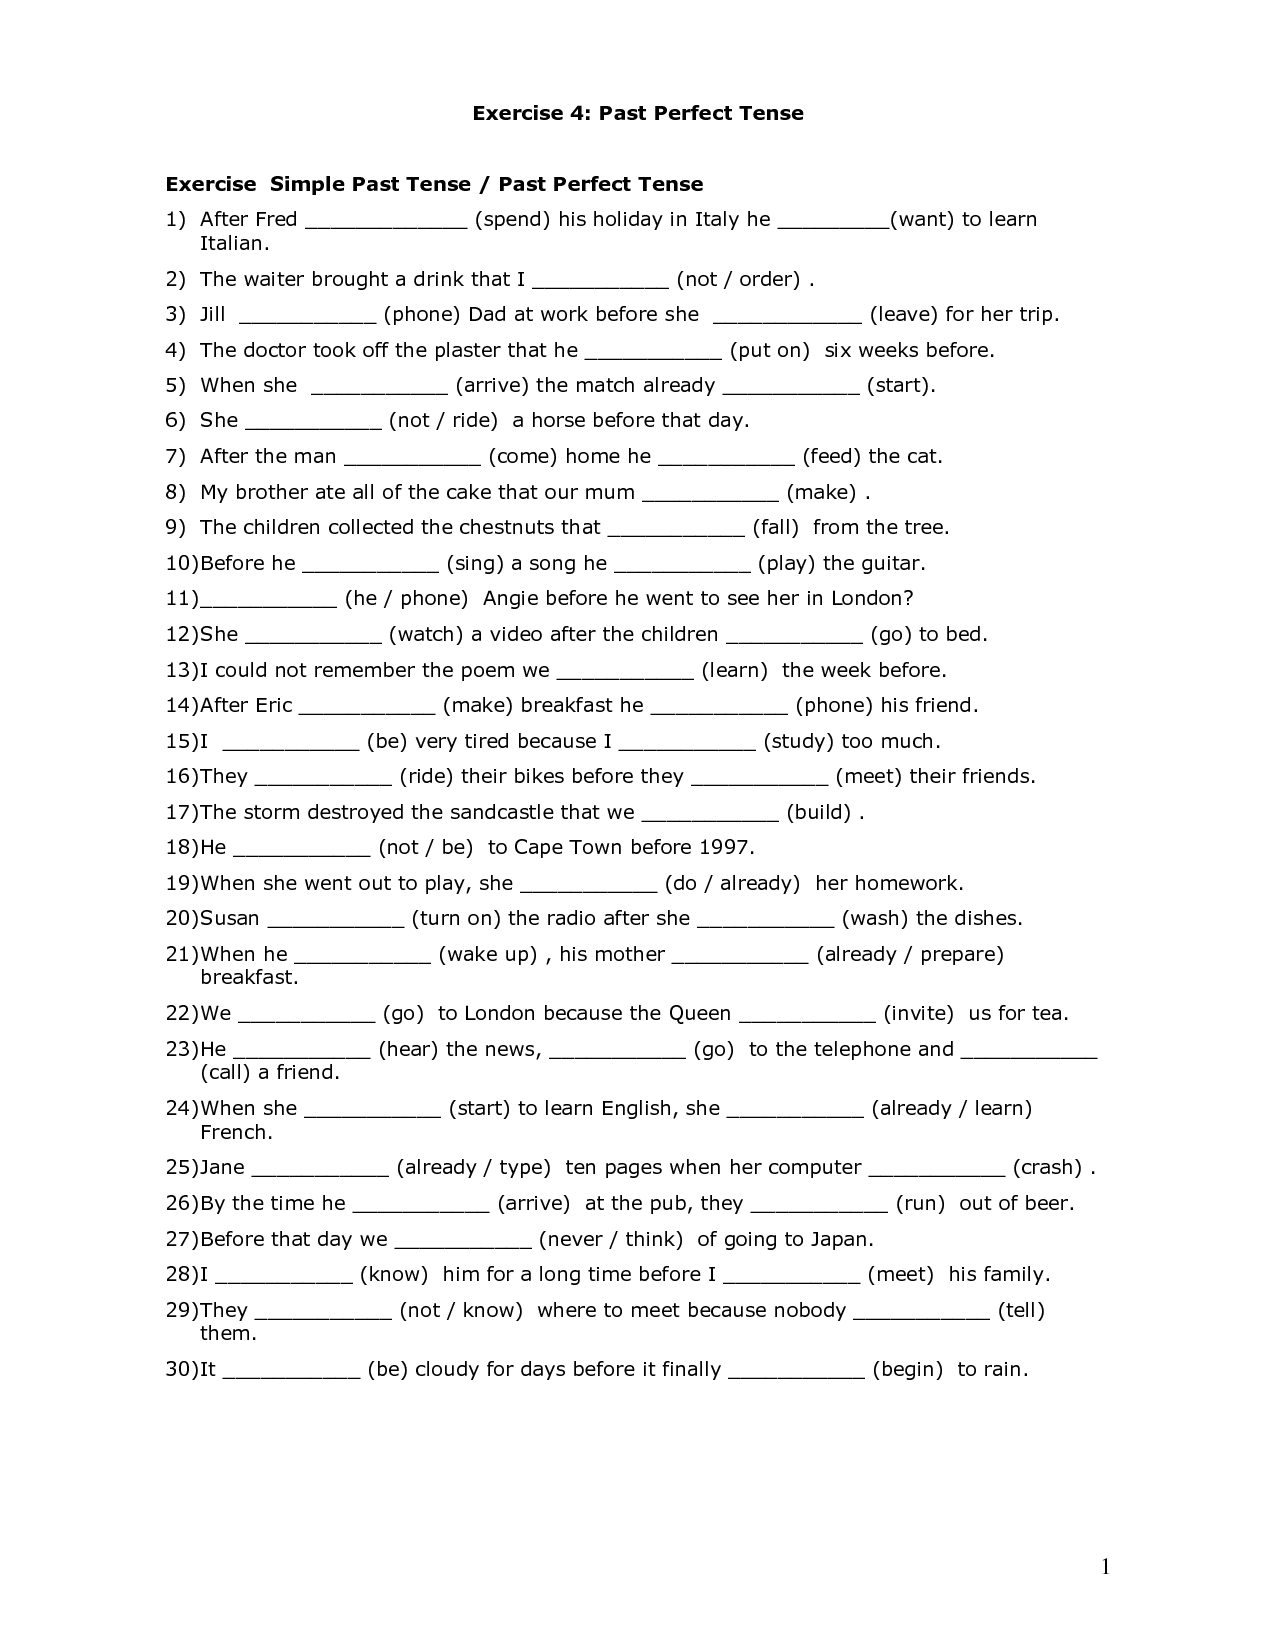 12-best-images-of-present-perfect-past-simple-worksheets-past-perfect